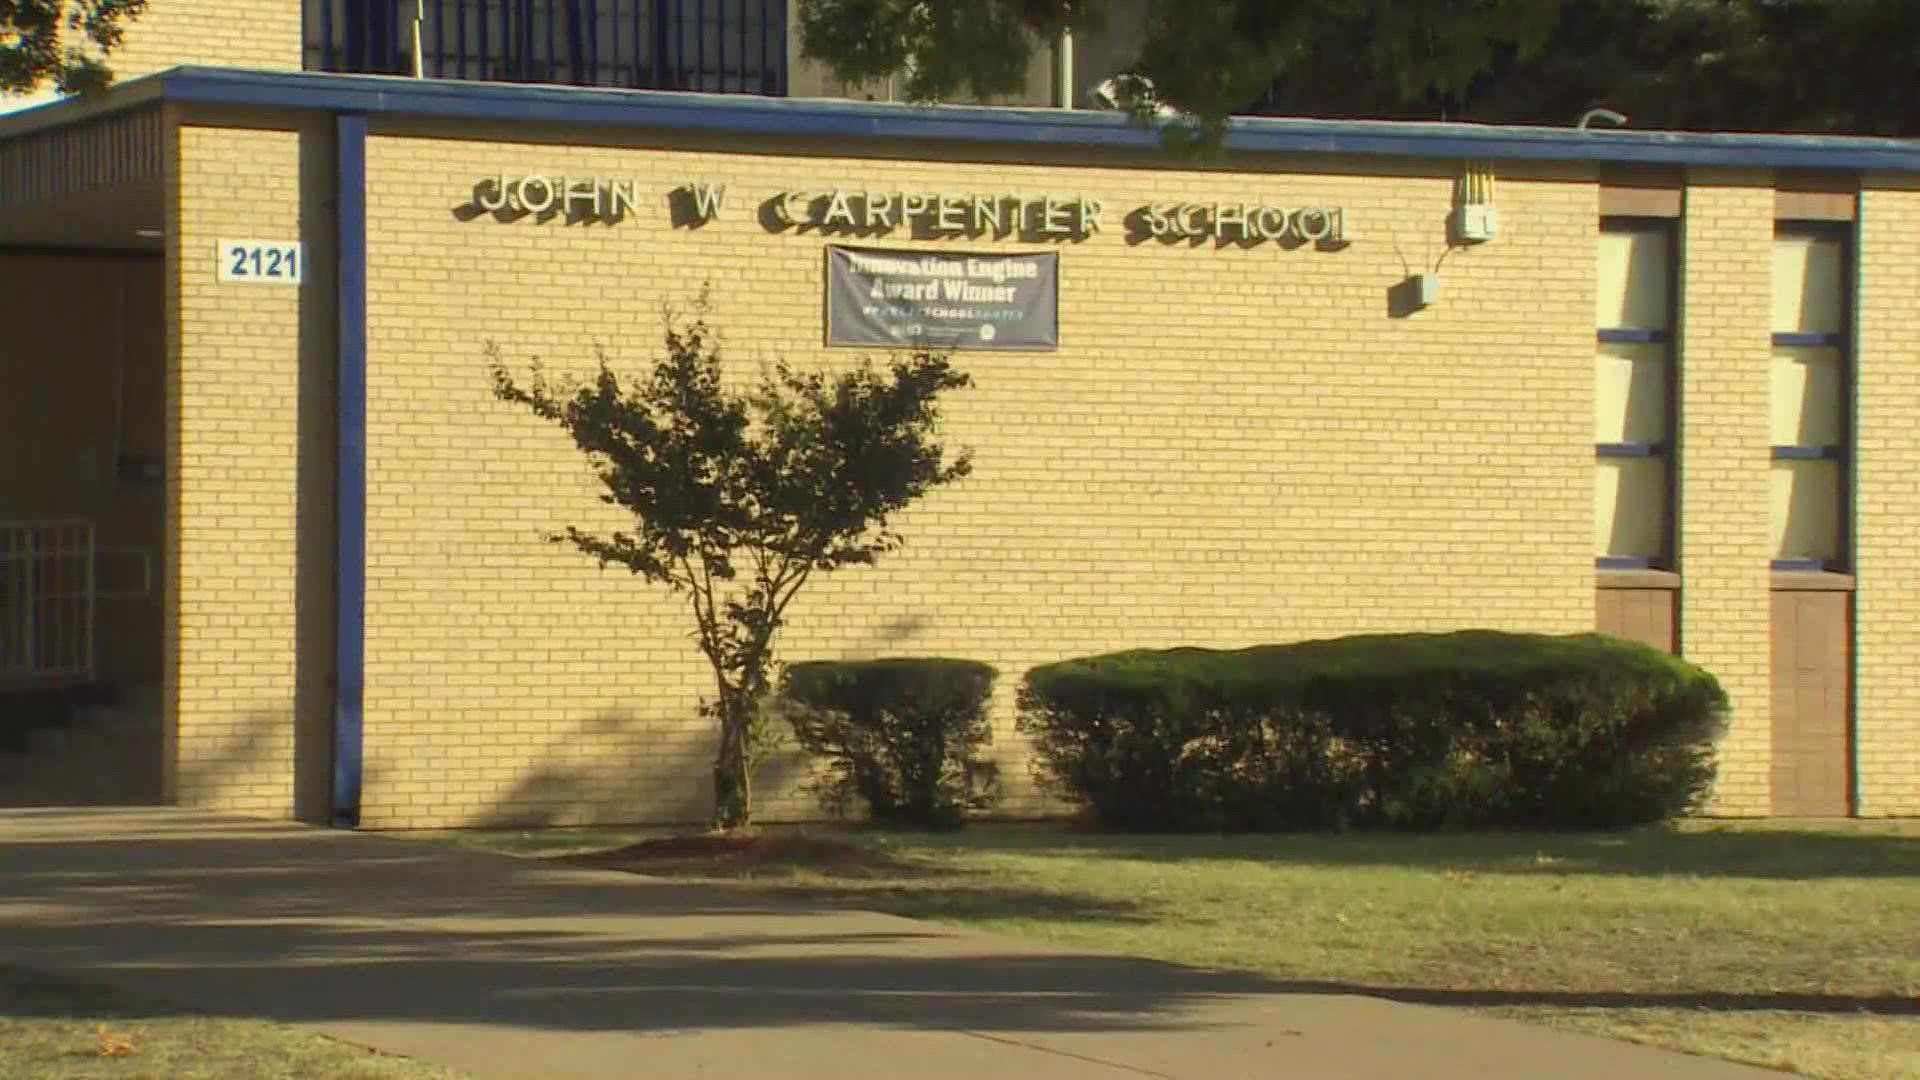 Dallas ISD confirmed to WFAA that a gun accidentally went off inside John W Carpenter Elementary School before classes began.